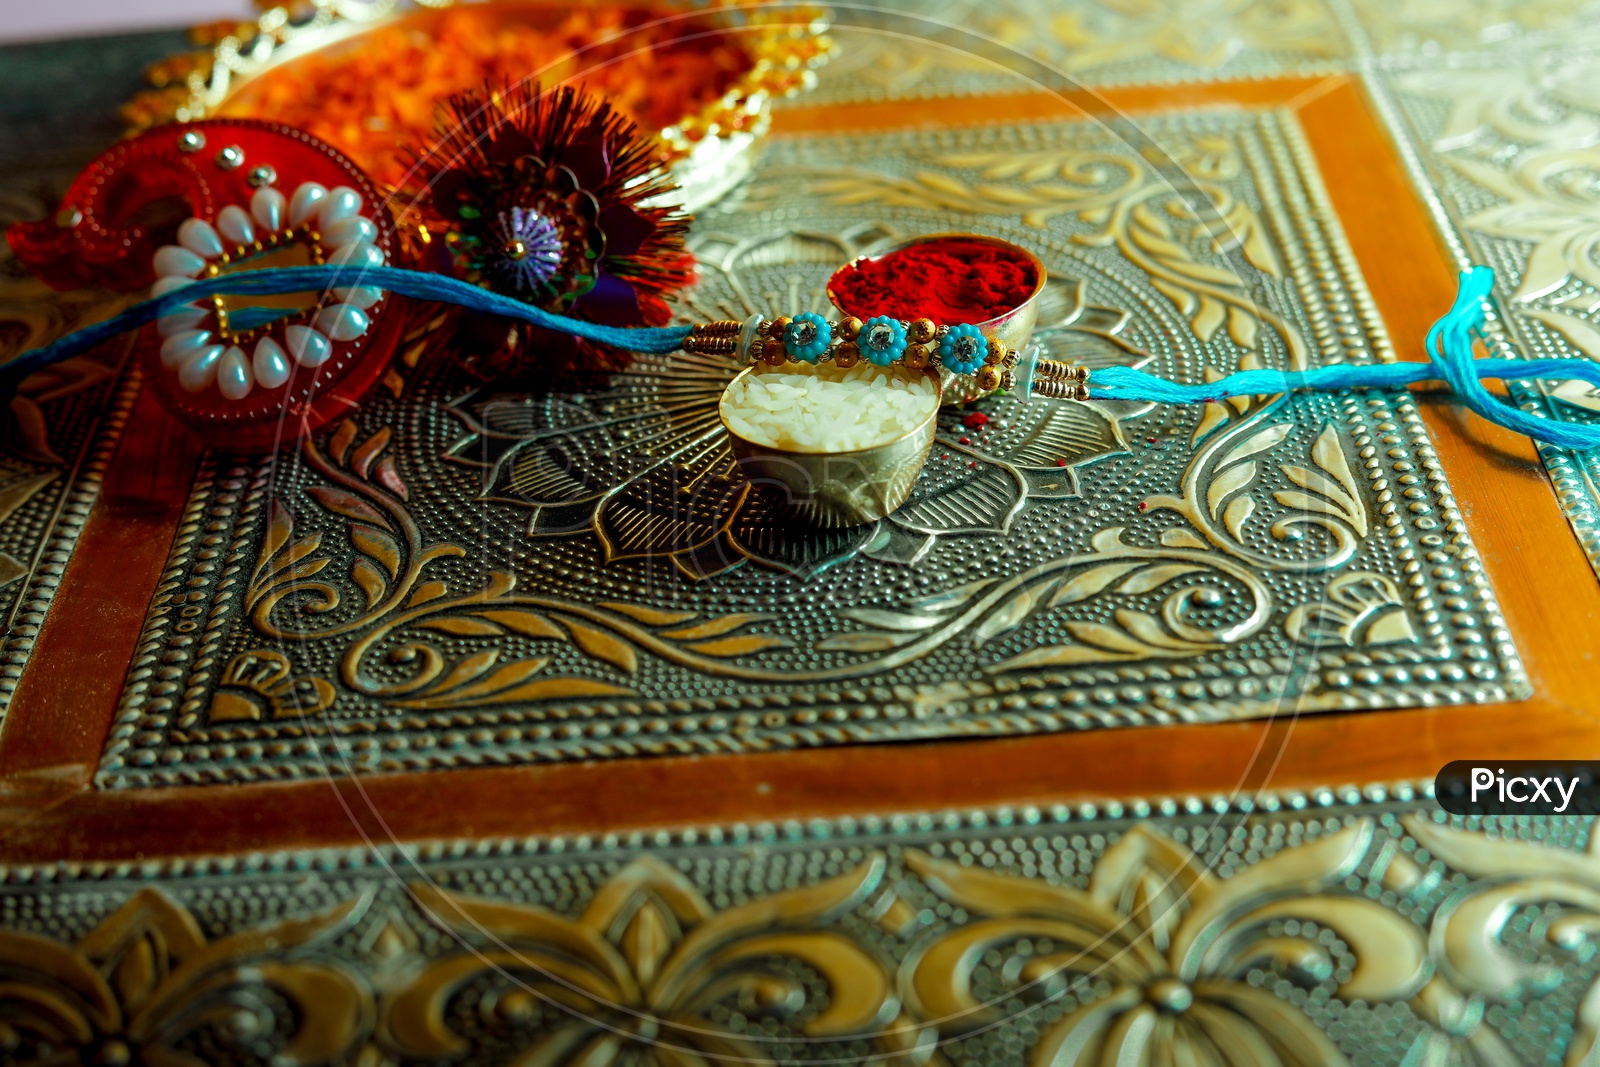 Blue Rakhi with Kumkum & rice -  Indian Festival traditions/rituals